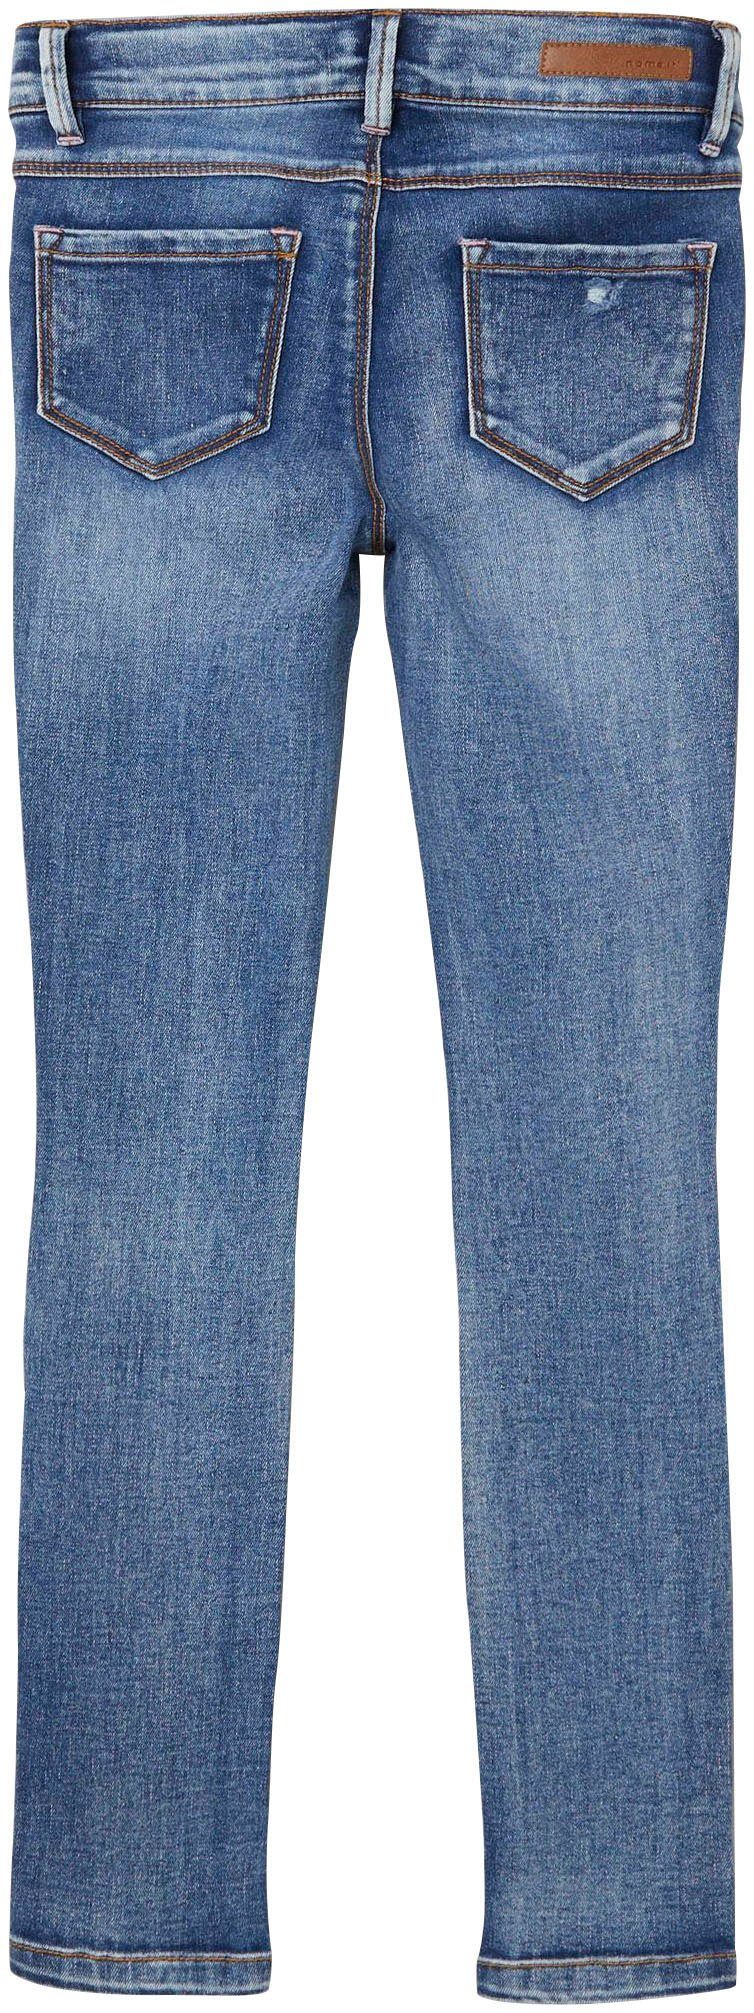 DNMTONSON It PANT 2678 Stretch-Jeans Name NKFPOLLY